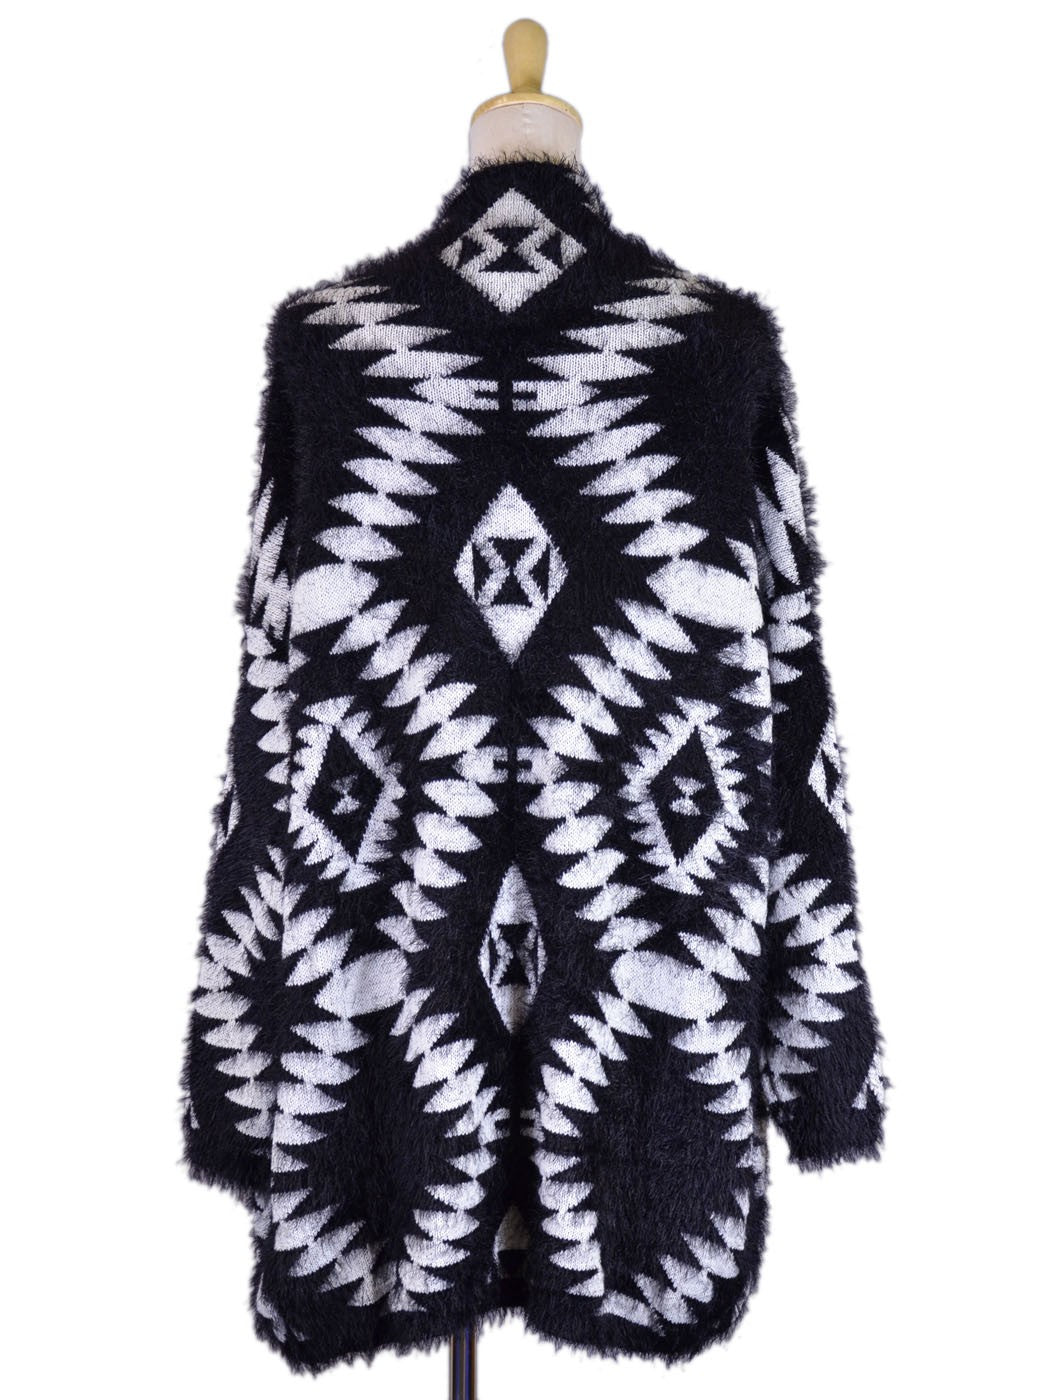 Cotton Candy Brand Black and White Geometric Print Fuzzy Texture Cardigan